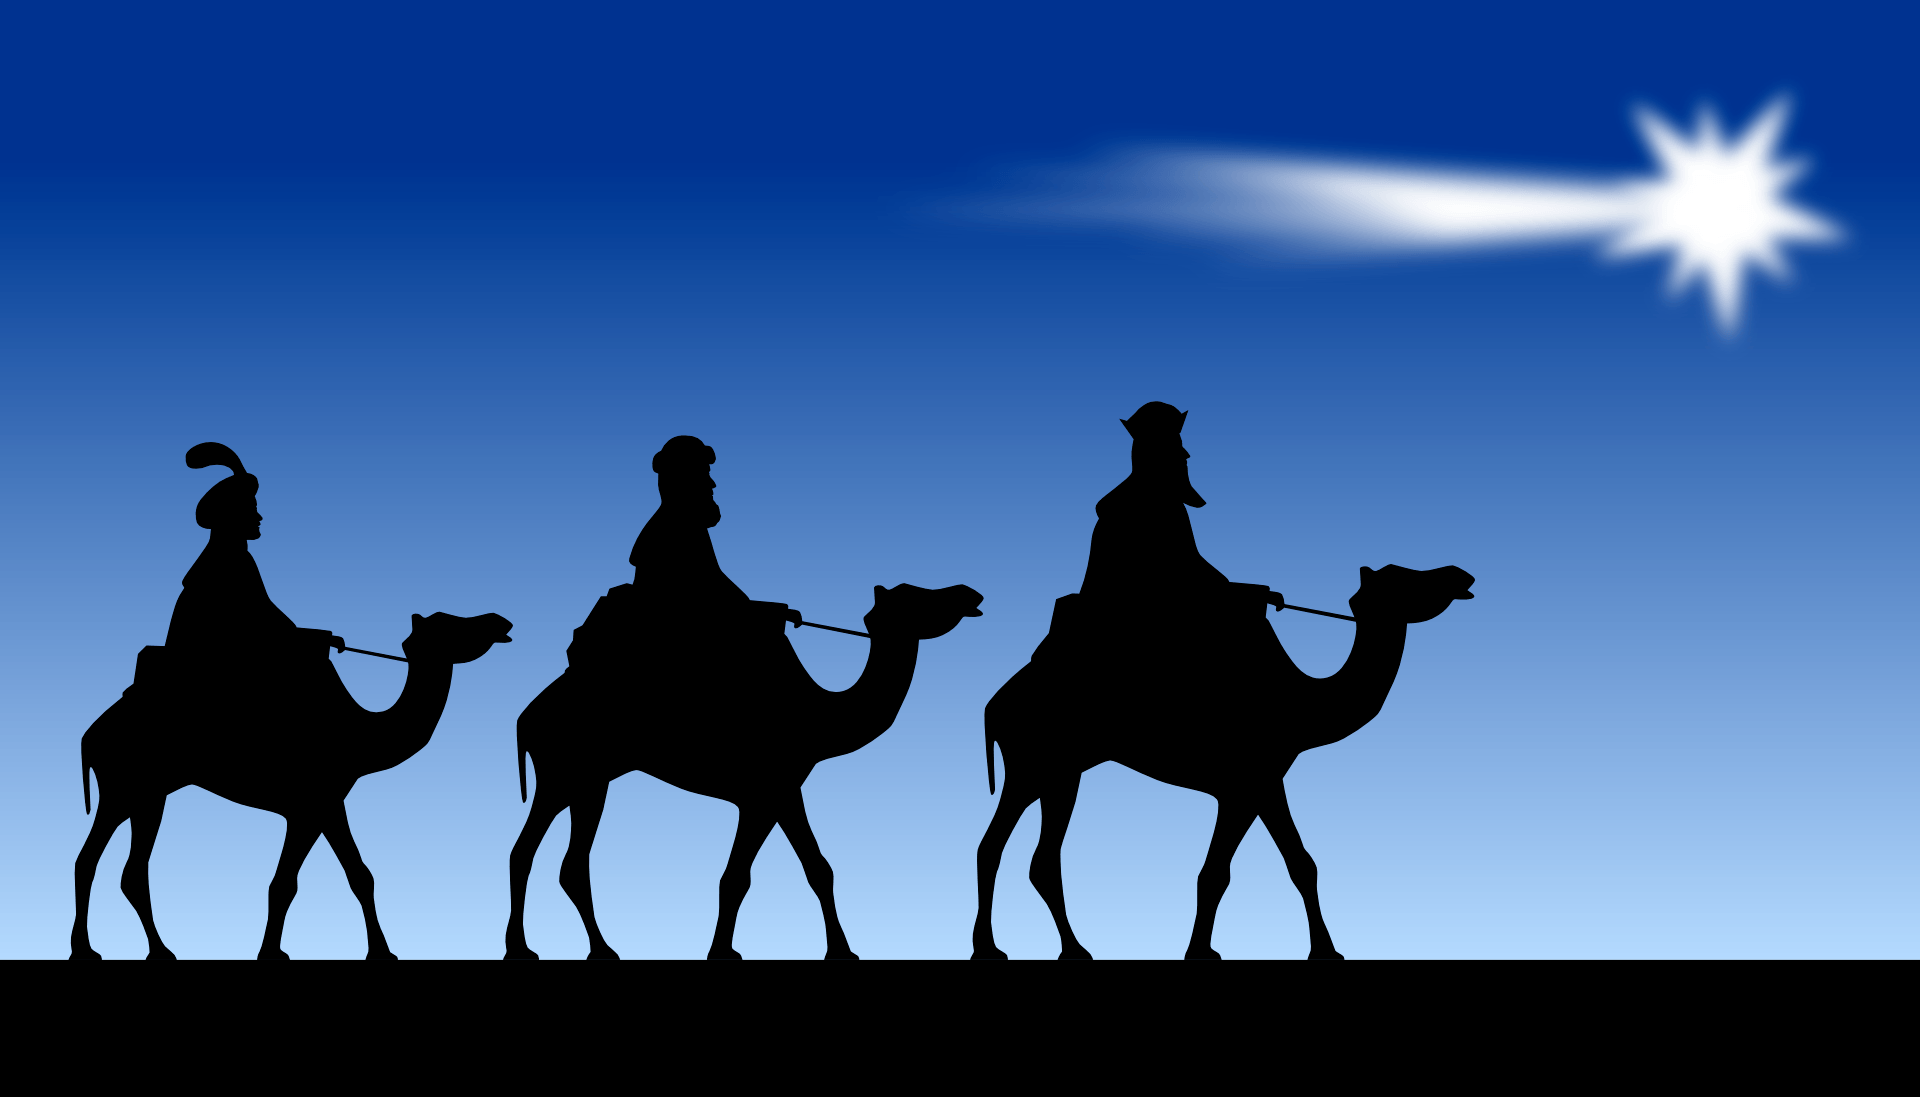 Who are The Three Wise Men? - reyes magos